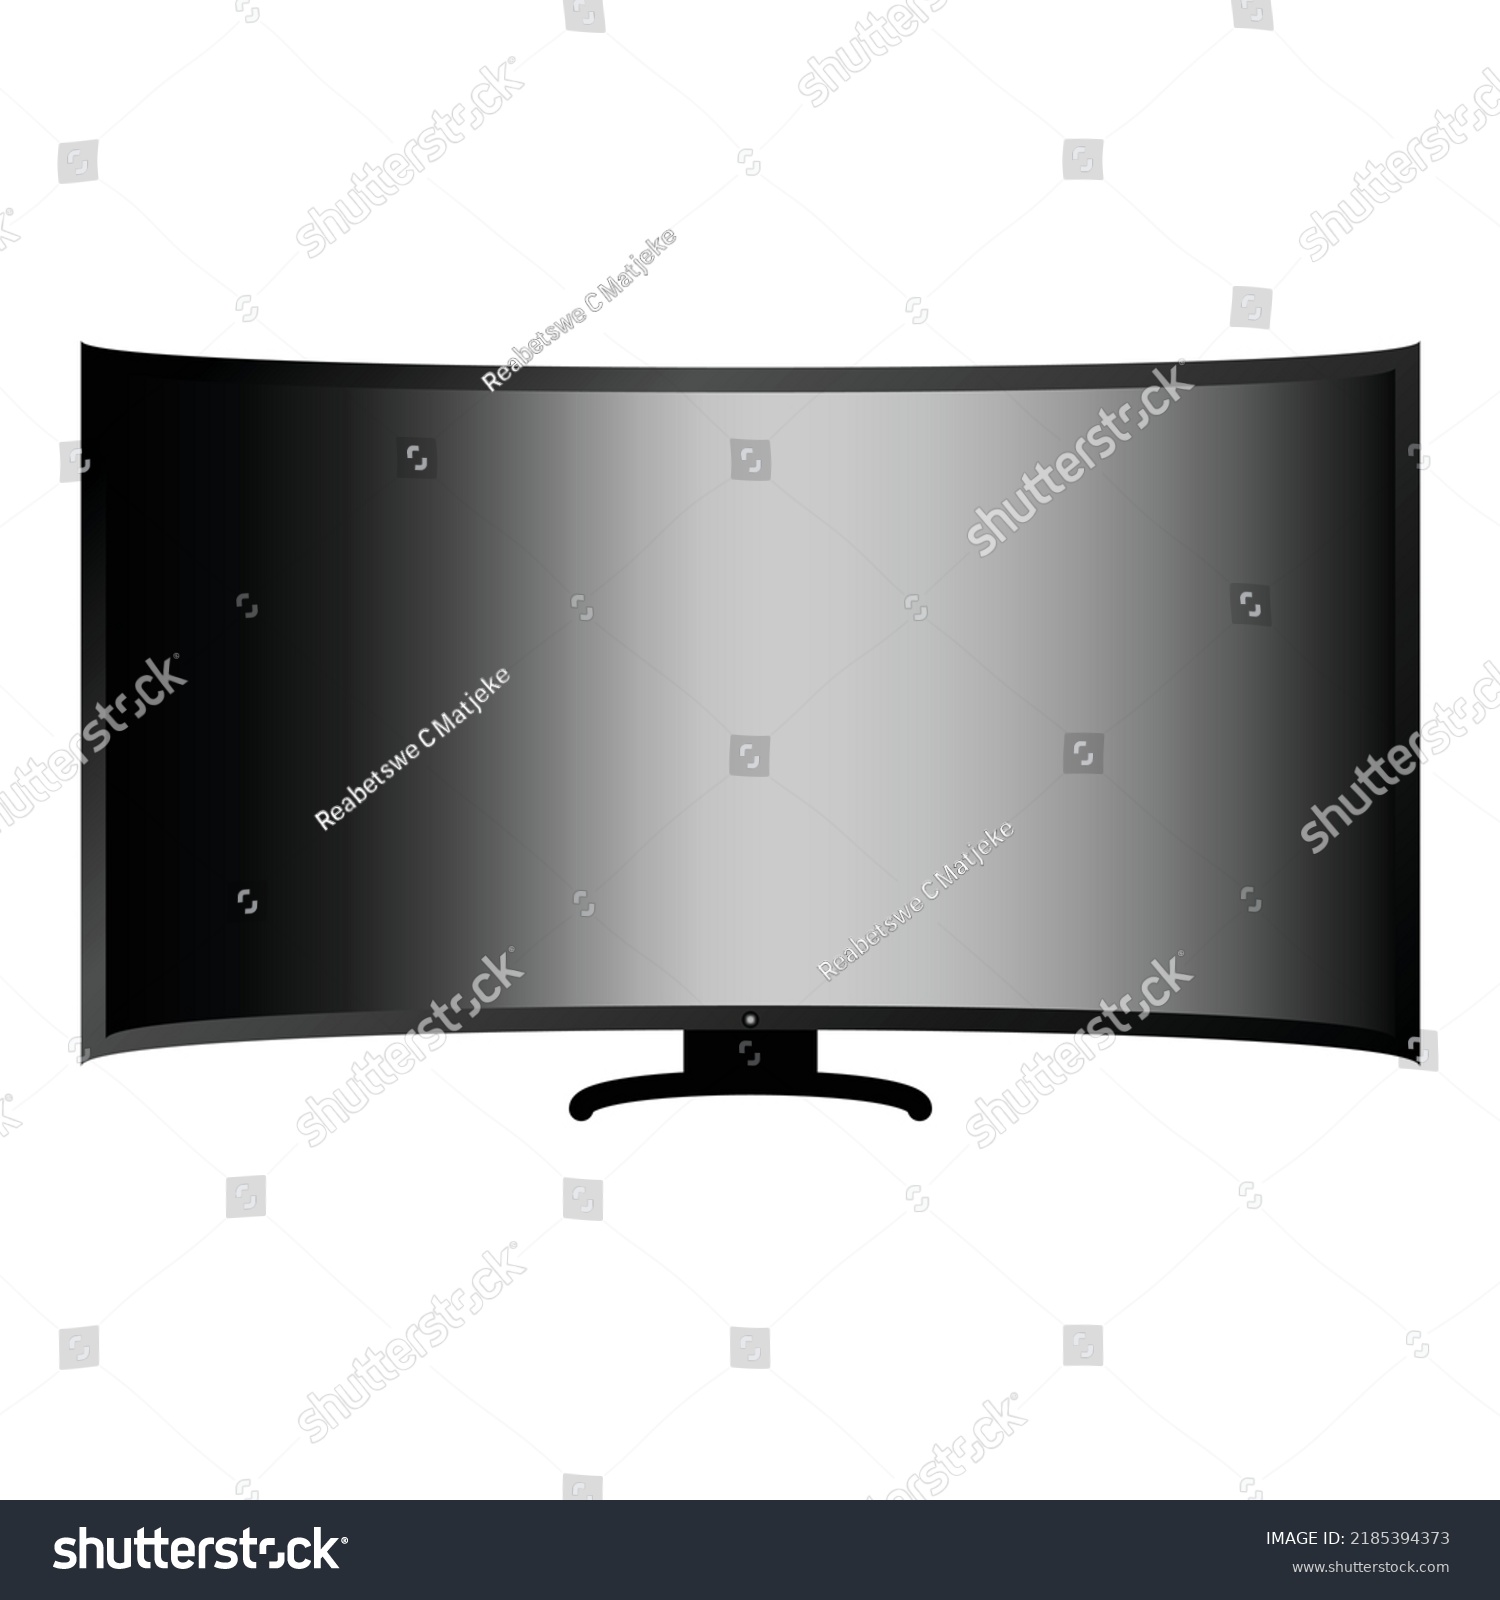 A vector design of a curved flat screen tv isolated on a white square background #2185394373